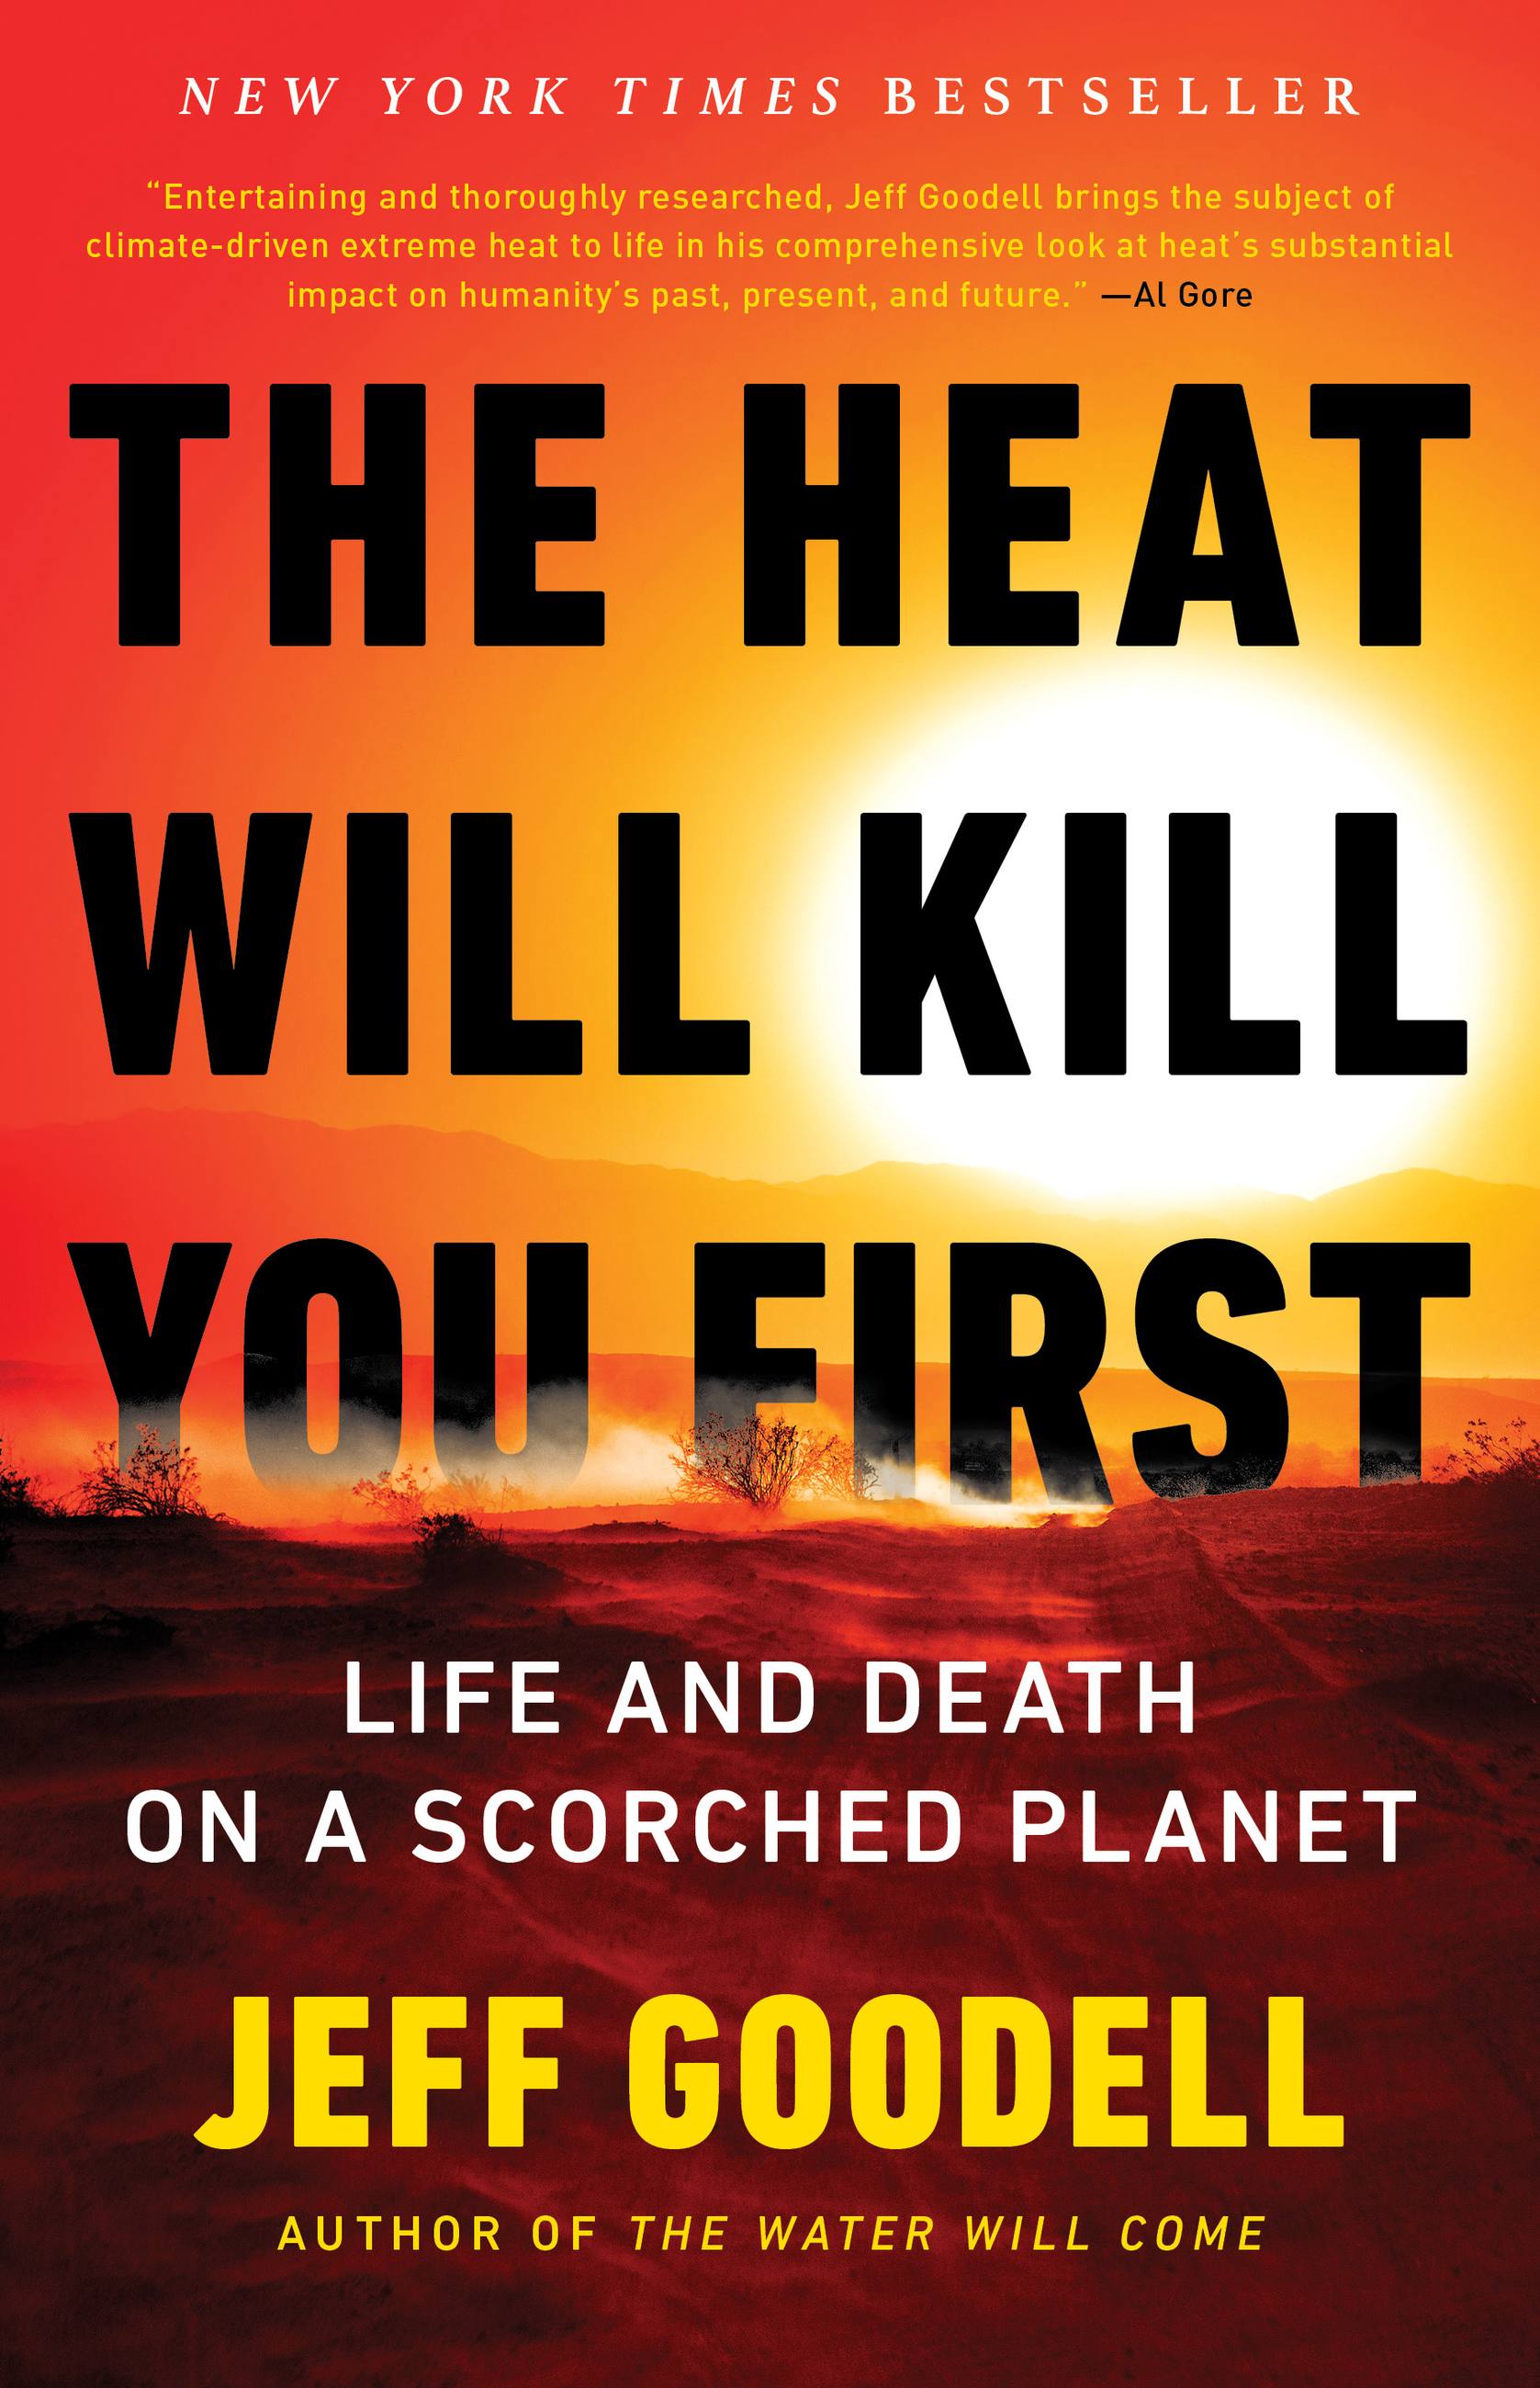 The　Goodell　Kill　Hachette　by　Will　Heat　Jeff　You　First　Book　Group